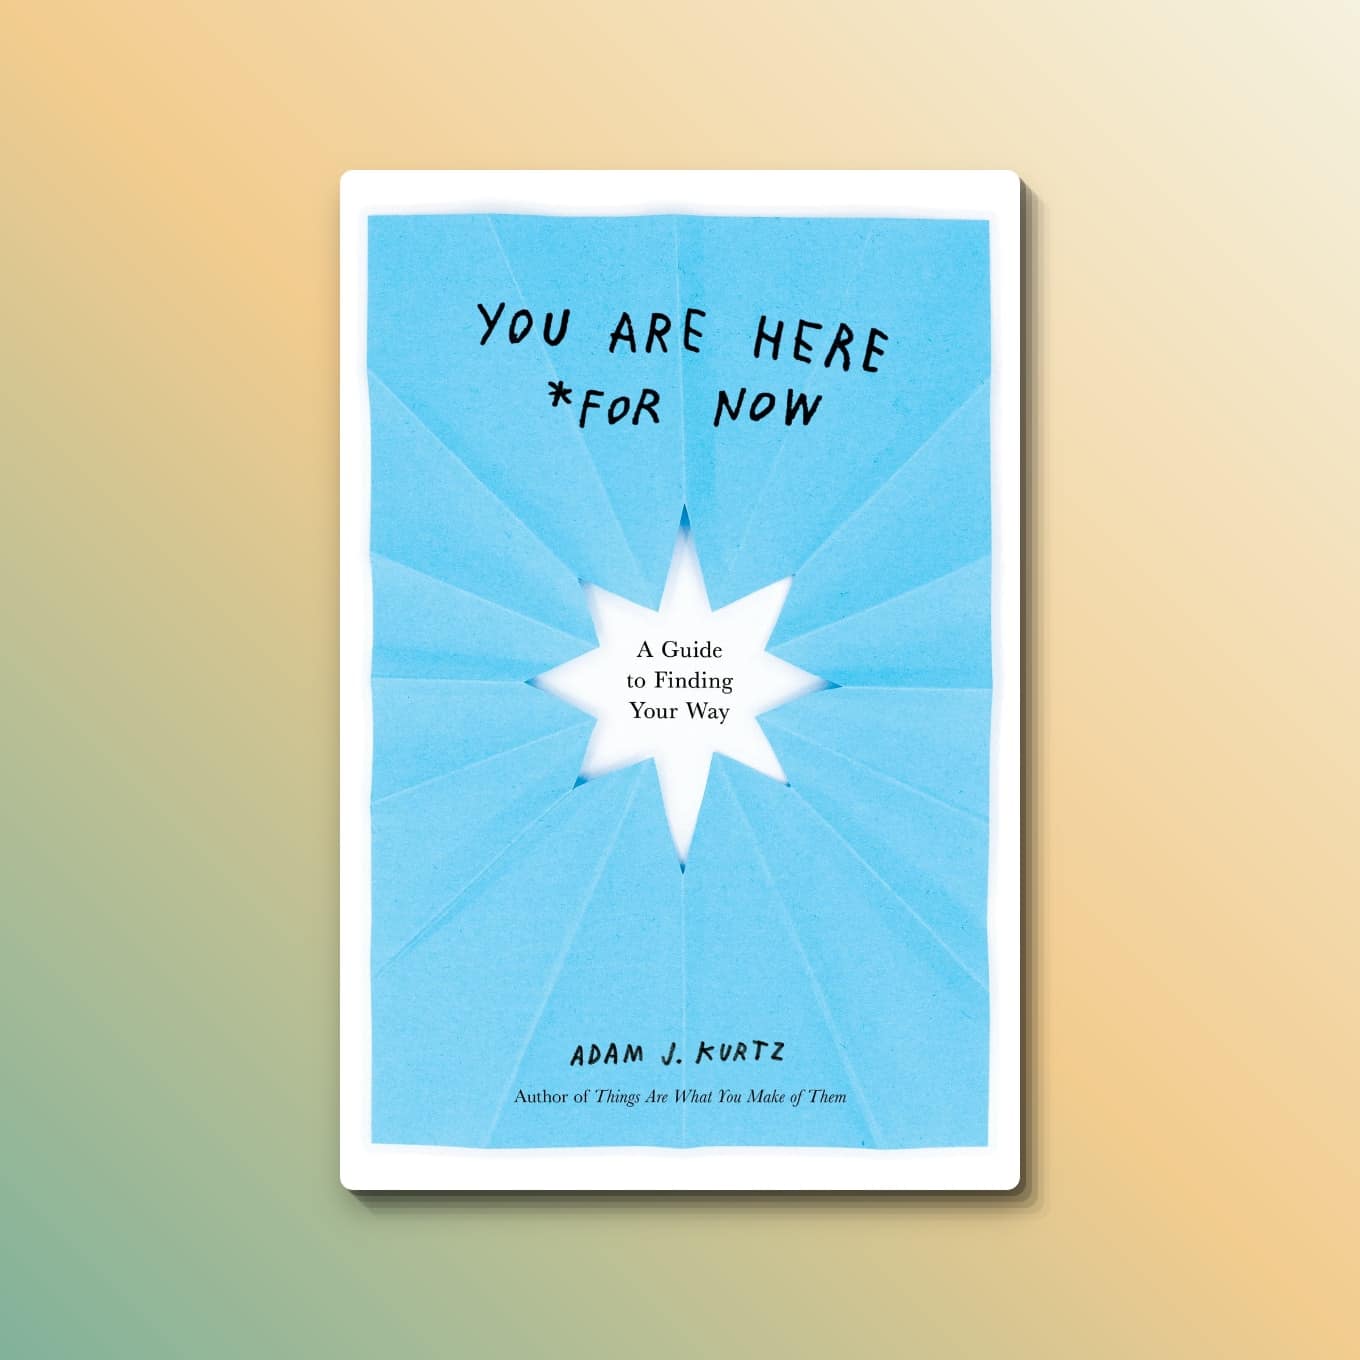 “You Are Here (For Now): A Guide to Finding Your Way” by Adam J. Kurtz